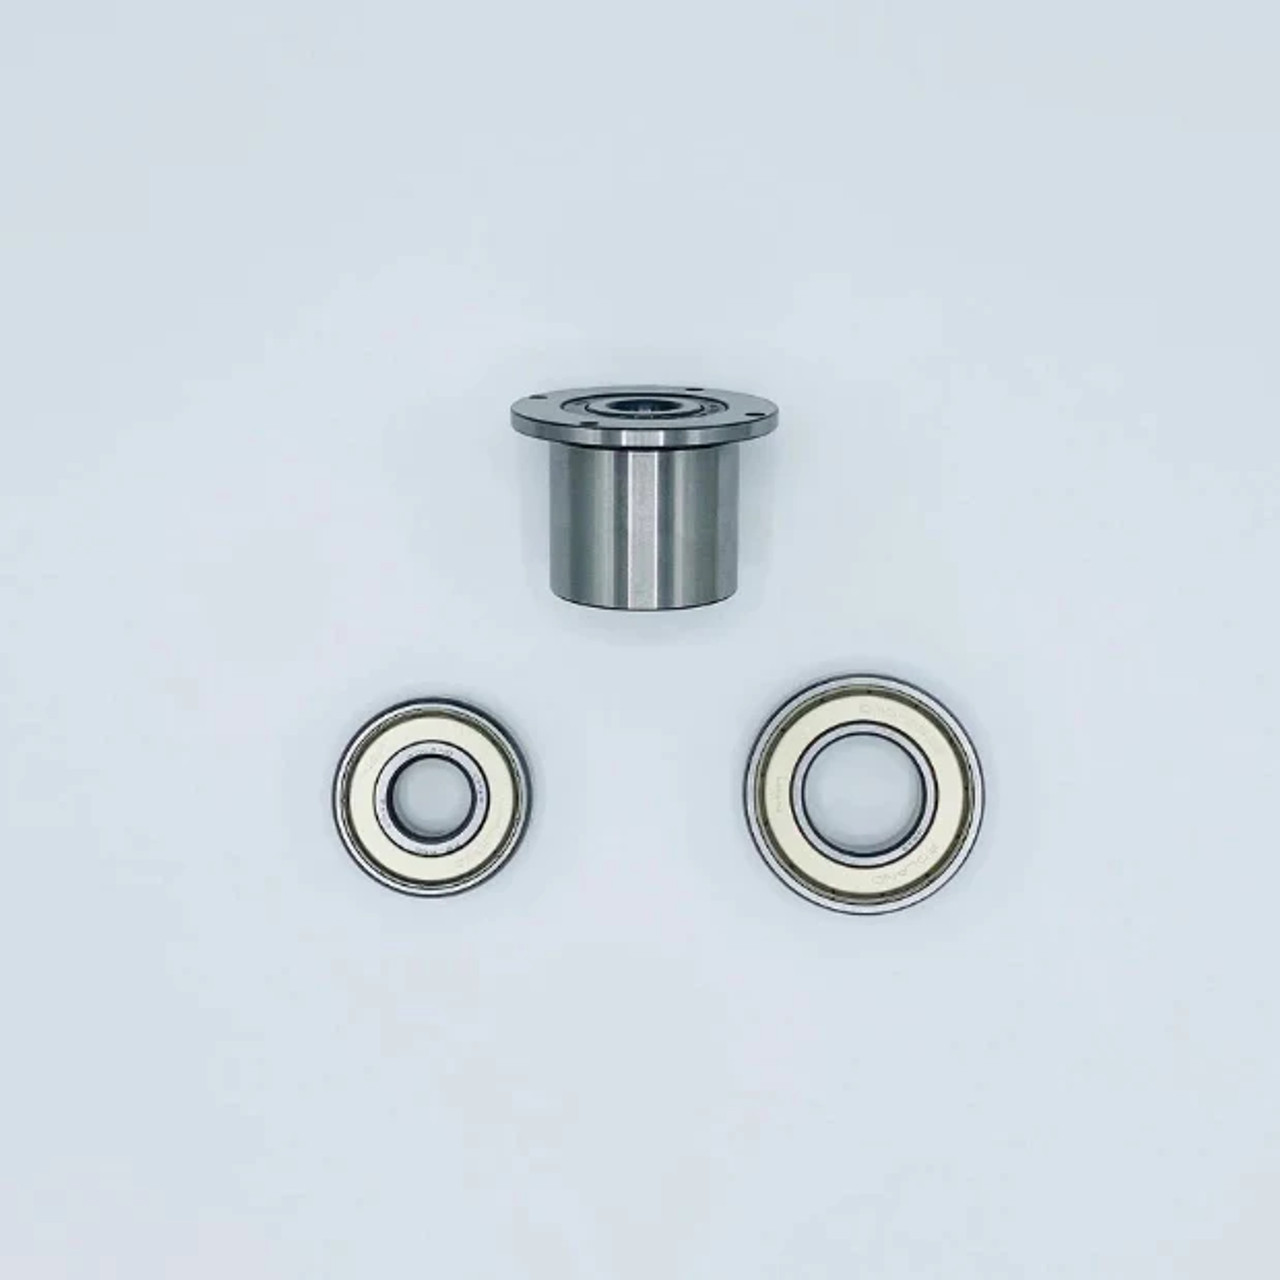  nXDS Scroll Pump Bearing Replacement Kit- Bearings only